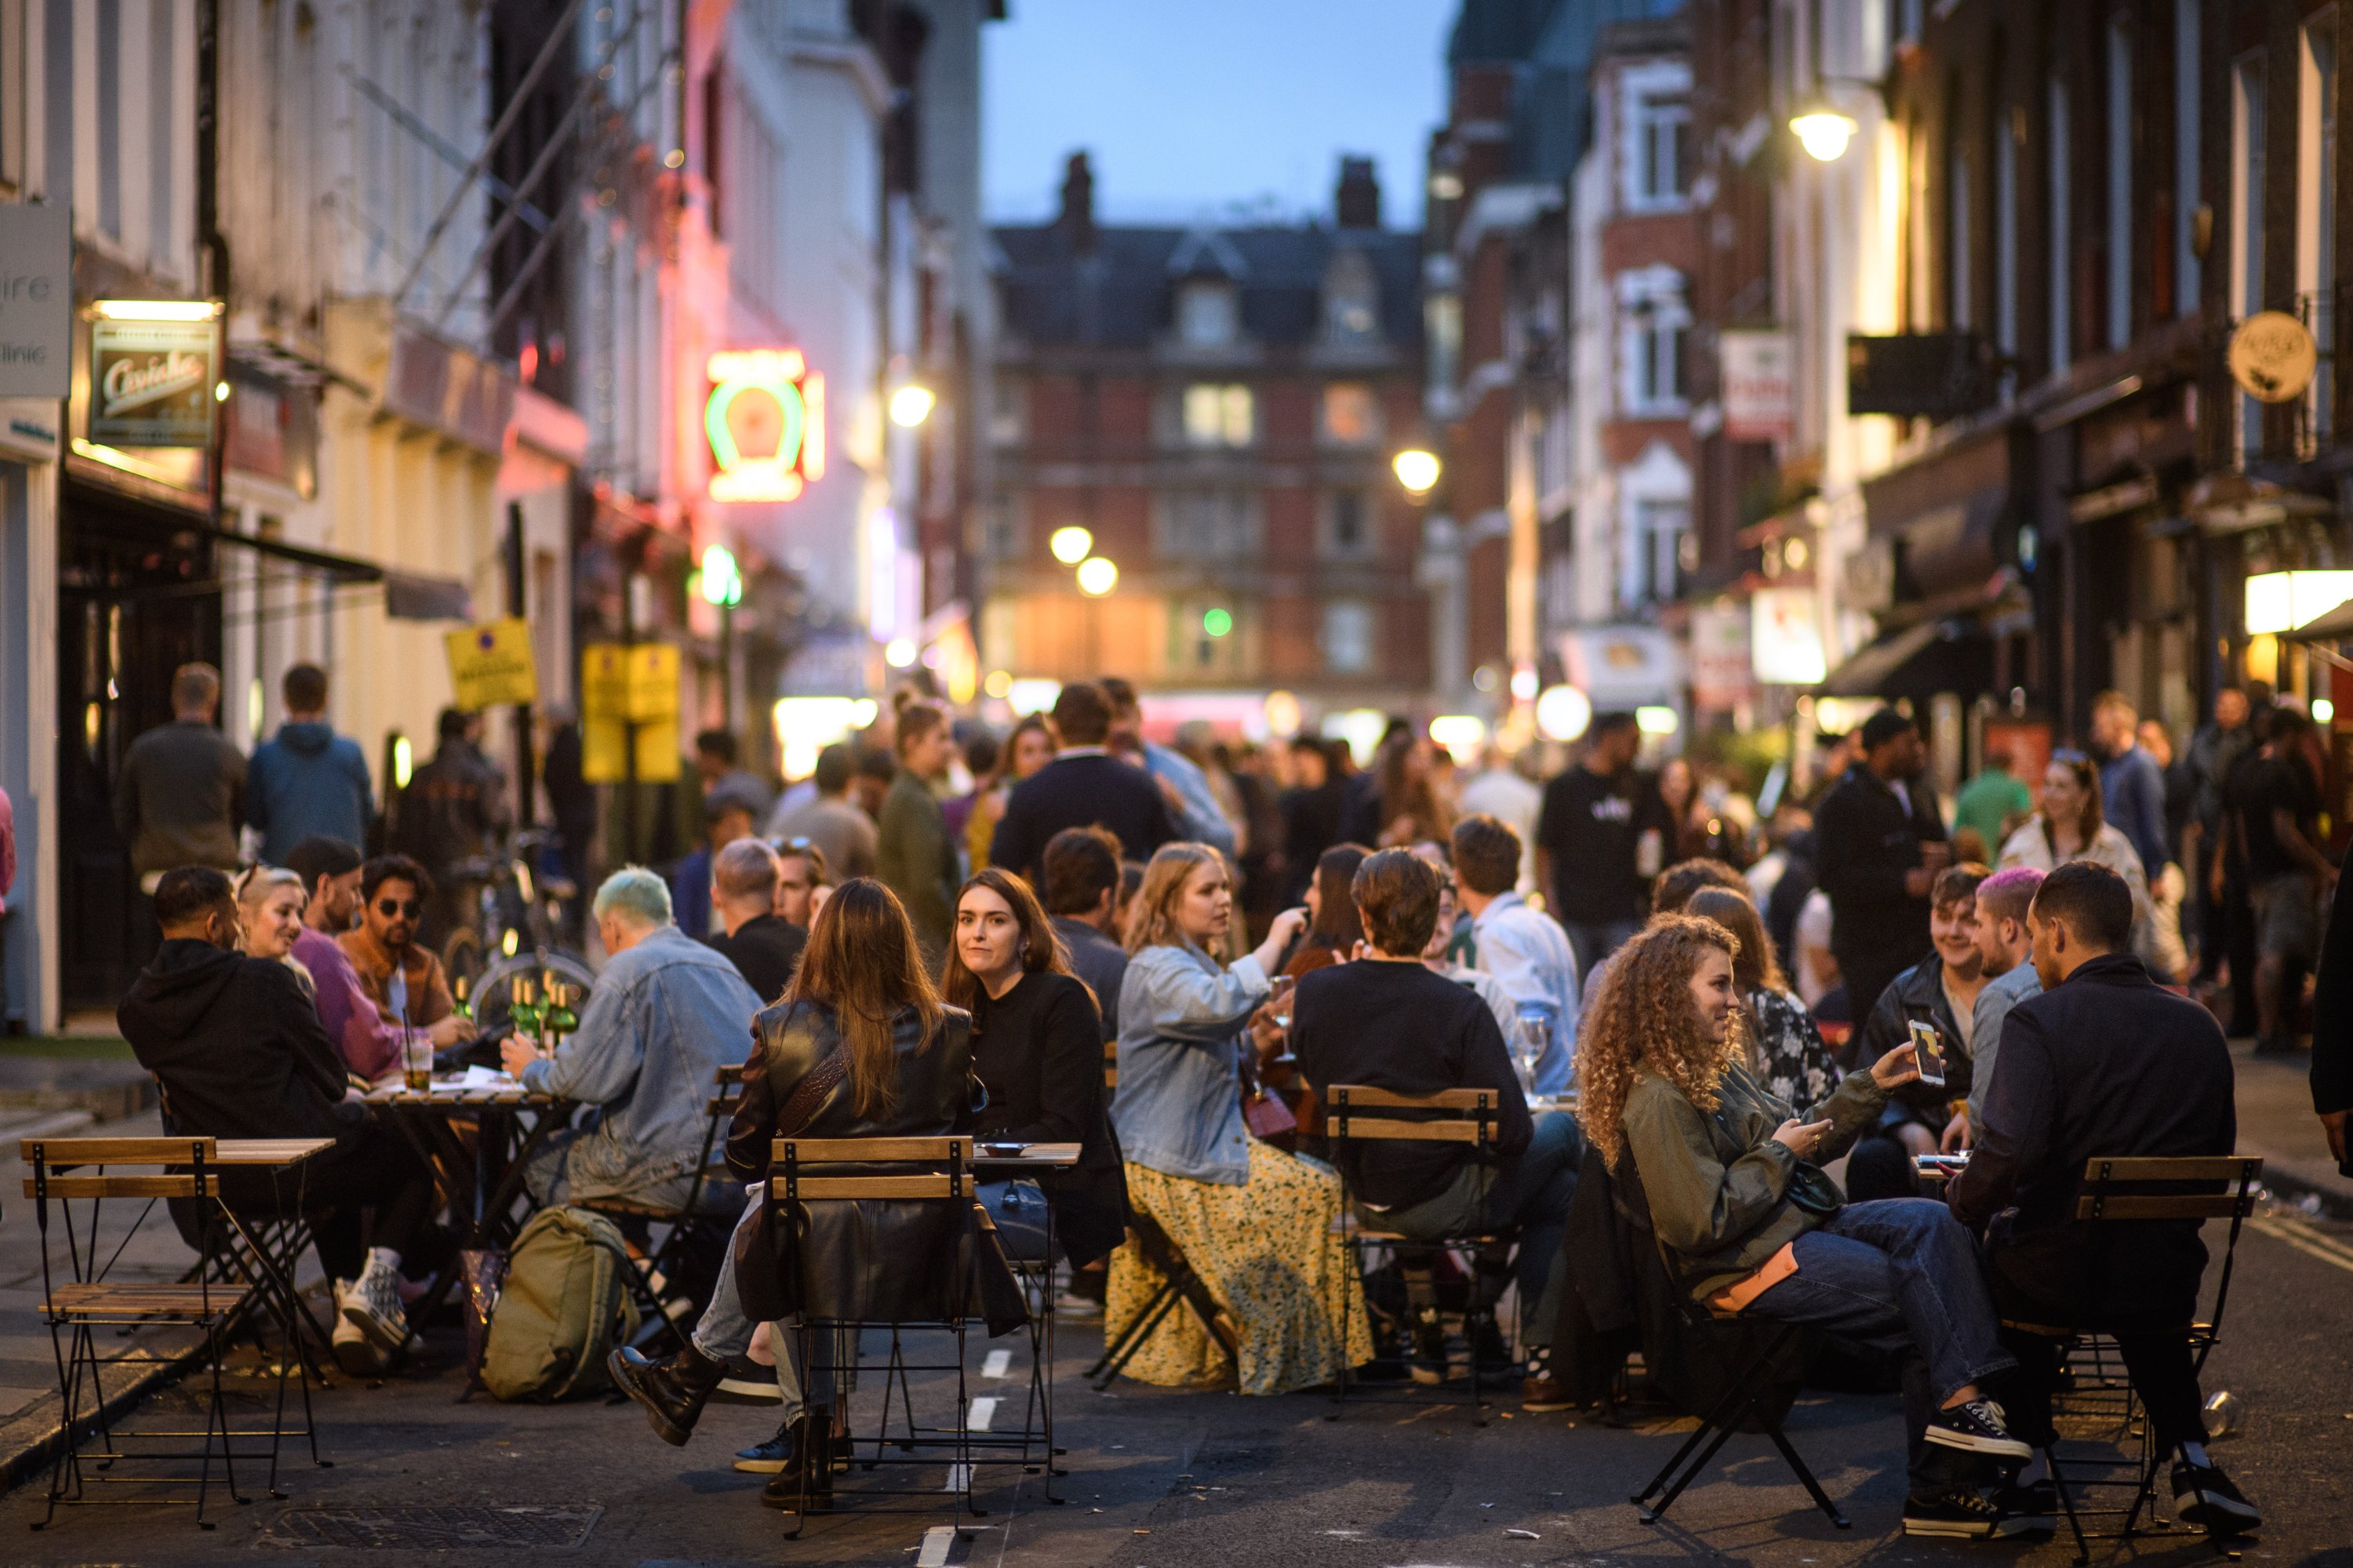 People eat and drink outdoors in Soho, London, as coronavirus lockdown restrictions are eased across England, July 5, 2020. (PA via Reuters)